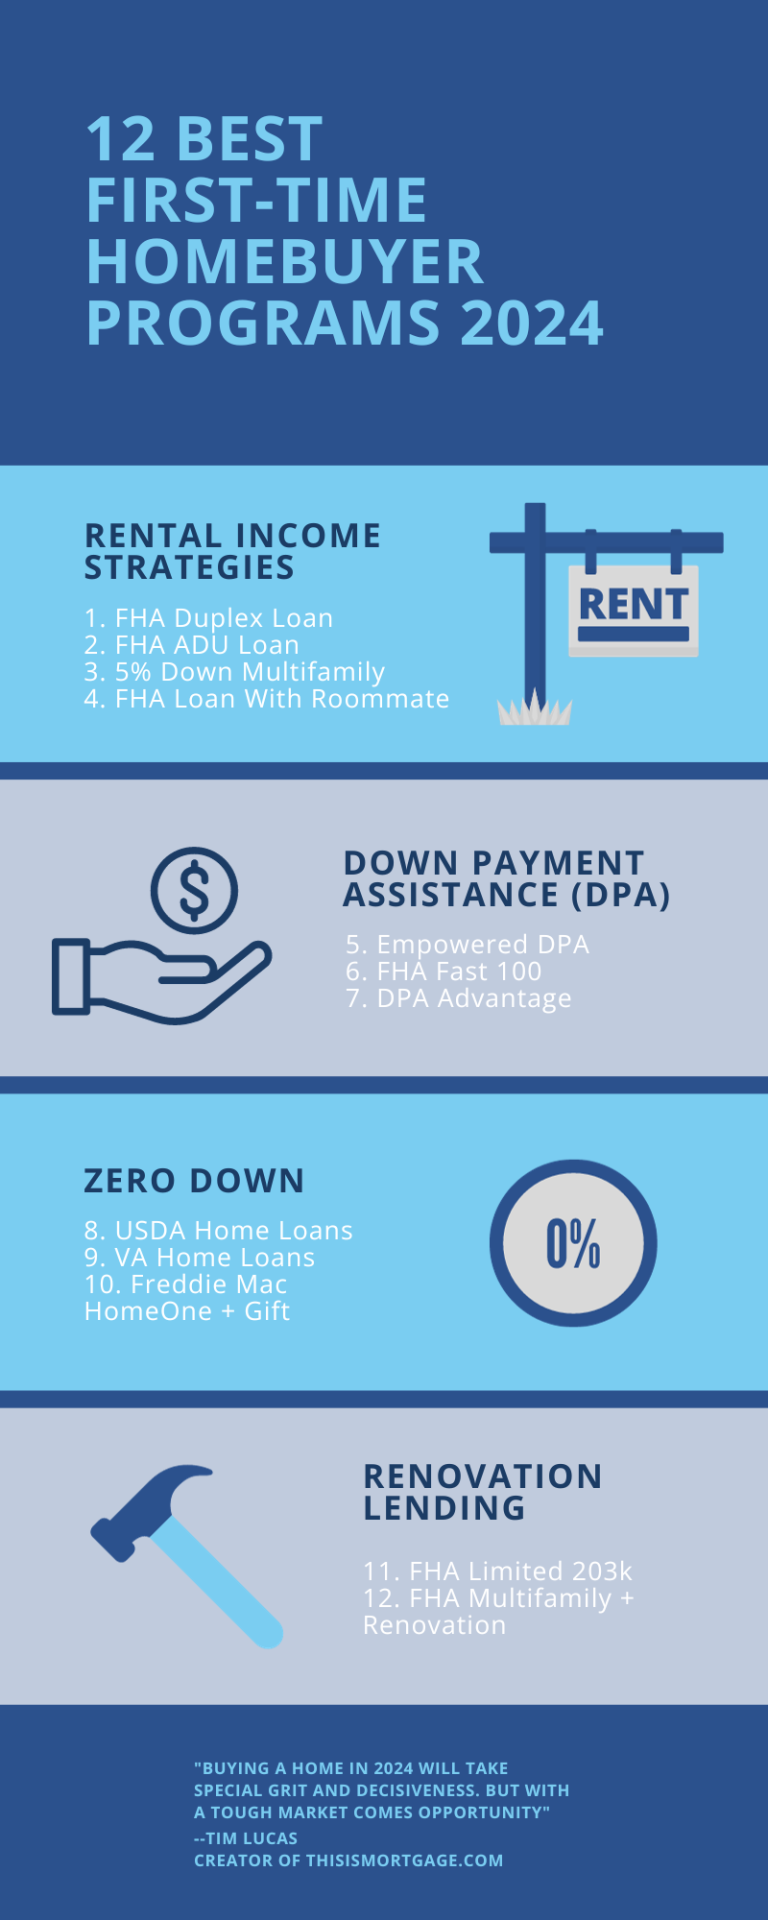 12 Best First Time Homebuyer Programs And Strategies For 2024 768x1920 